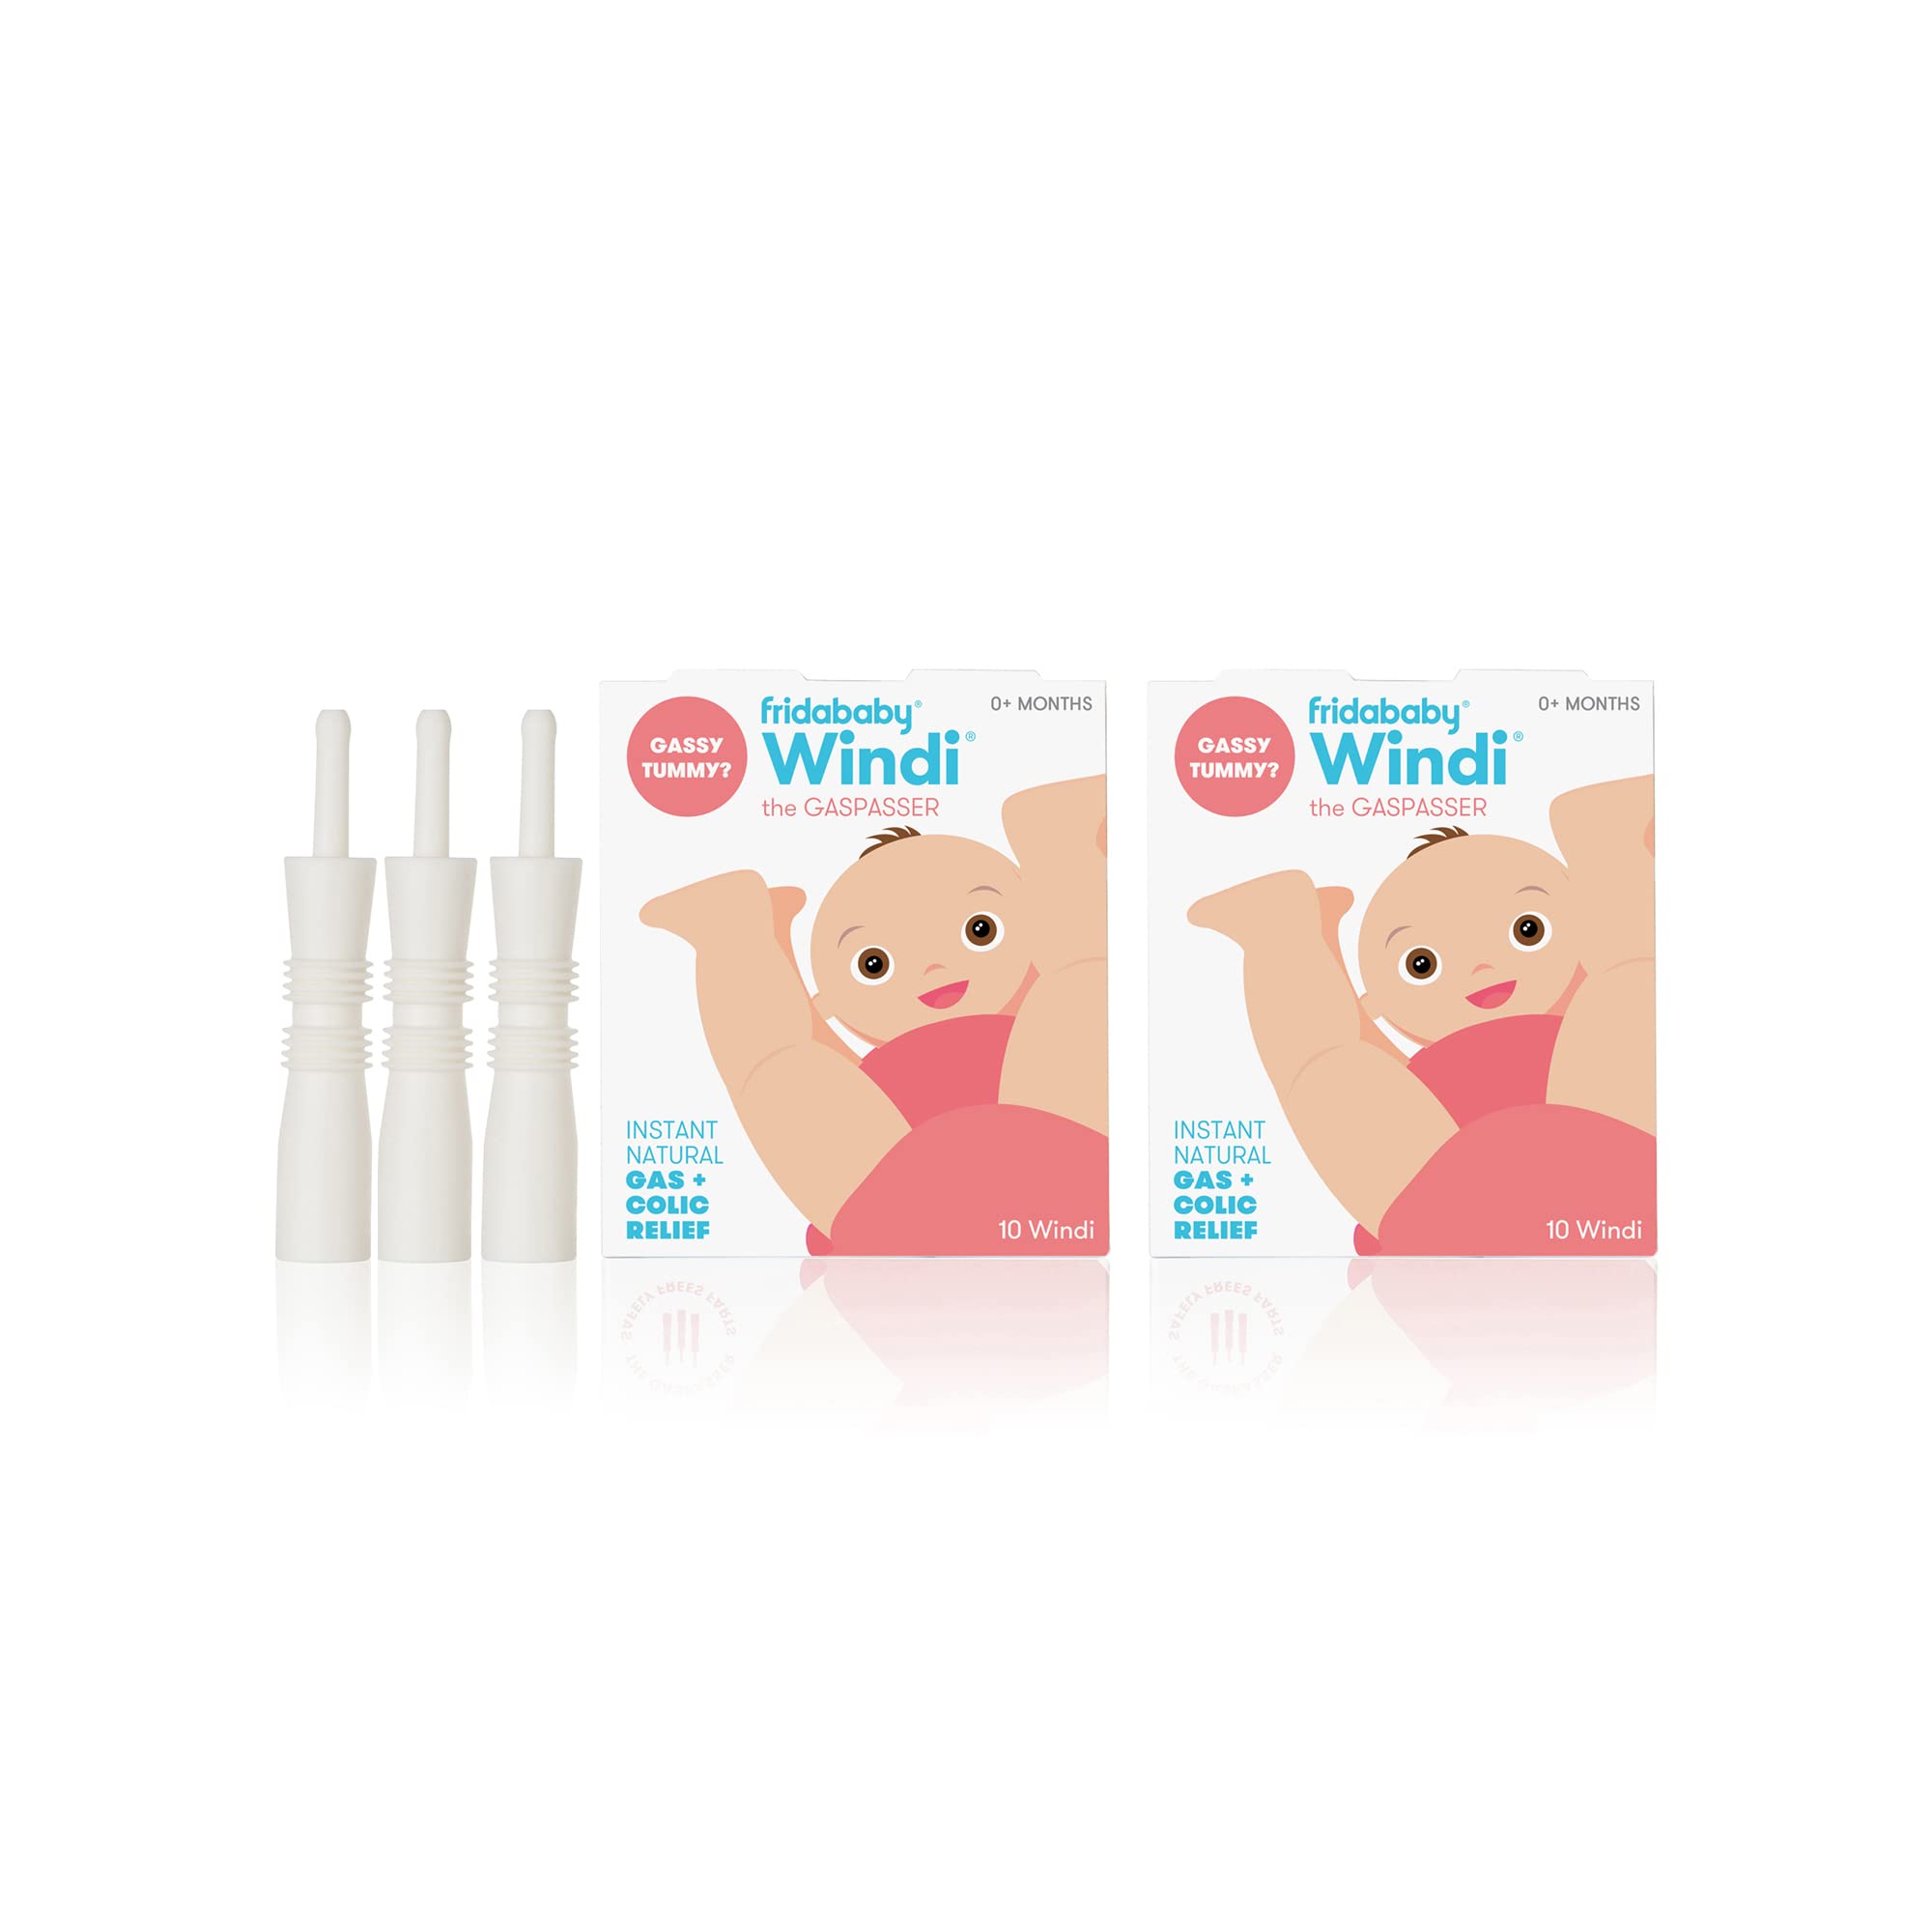 Fridababy Windi GAS and Colic Reliever for Babies